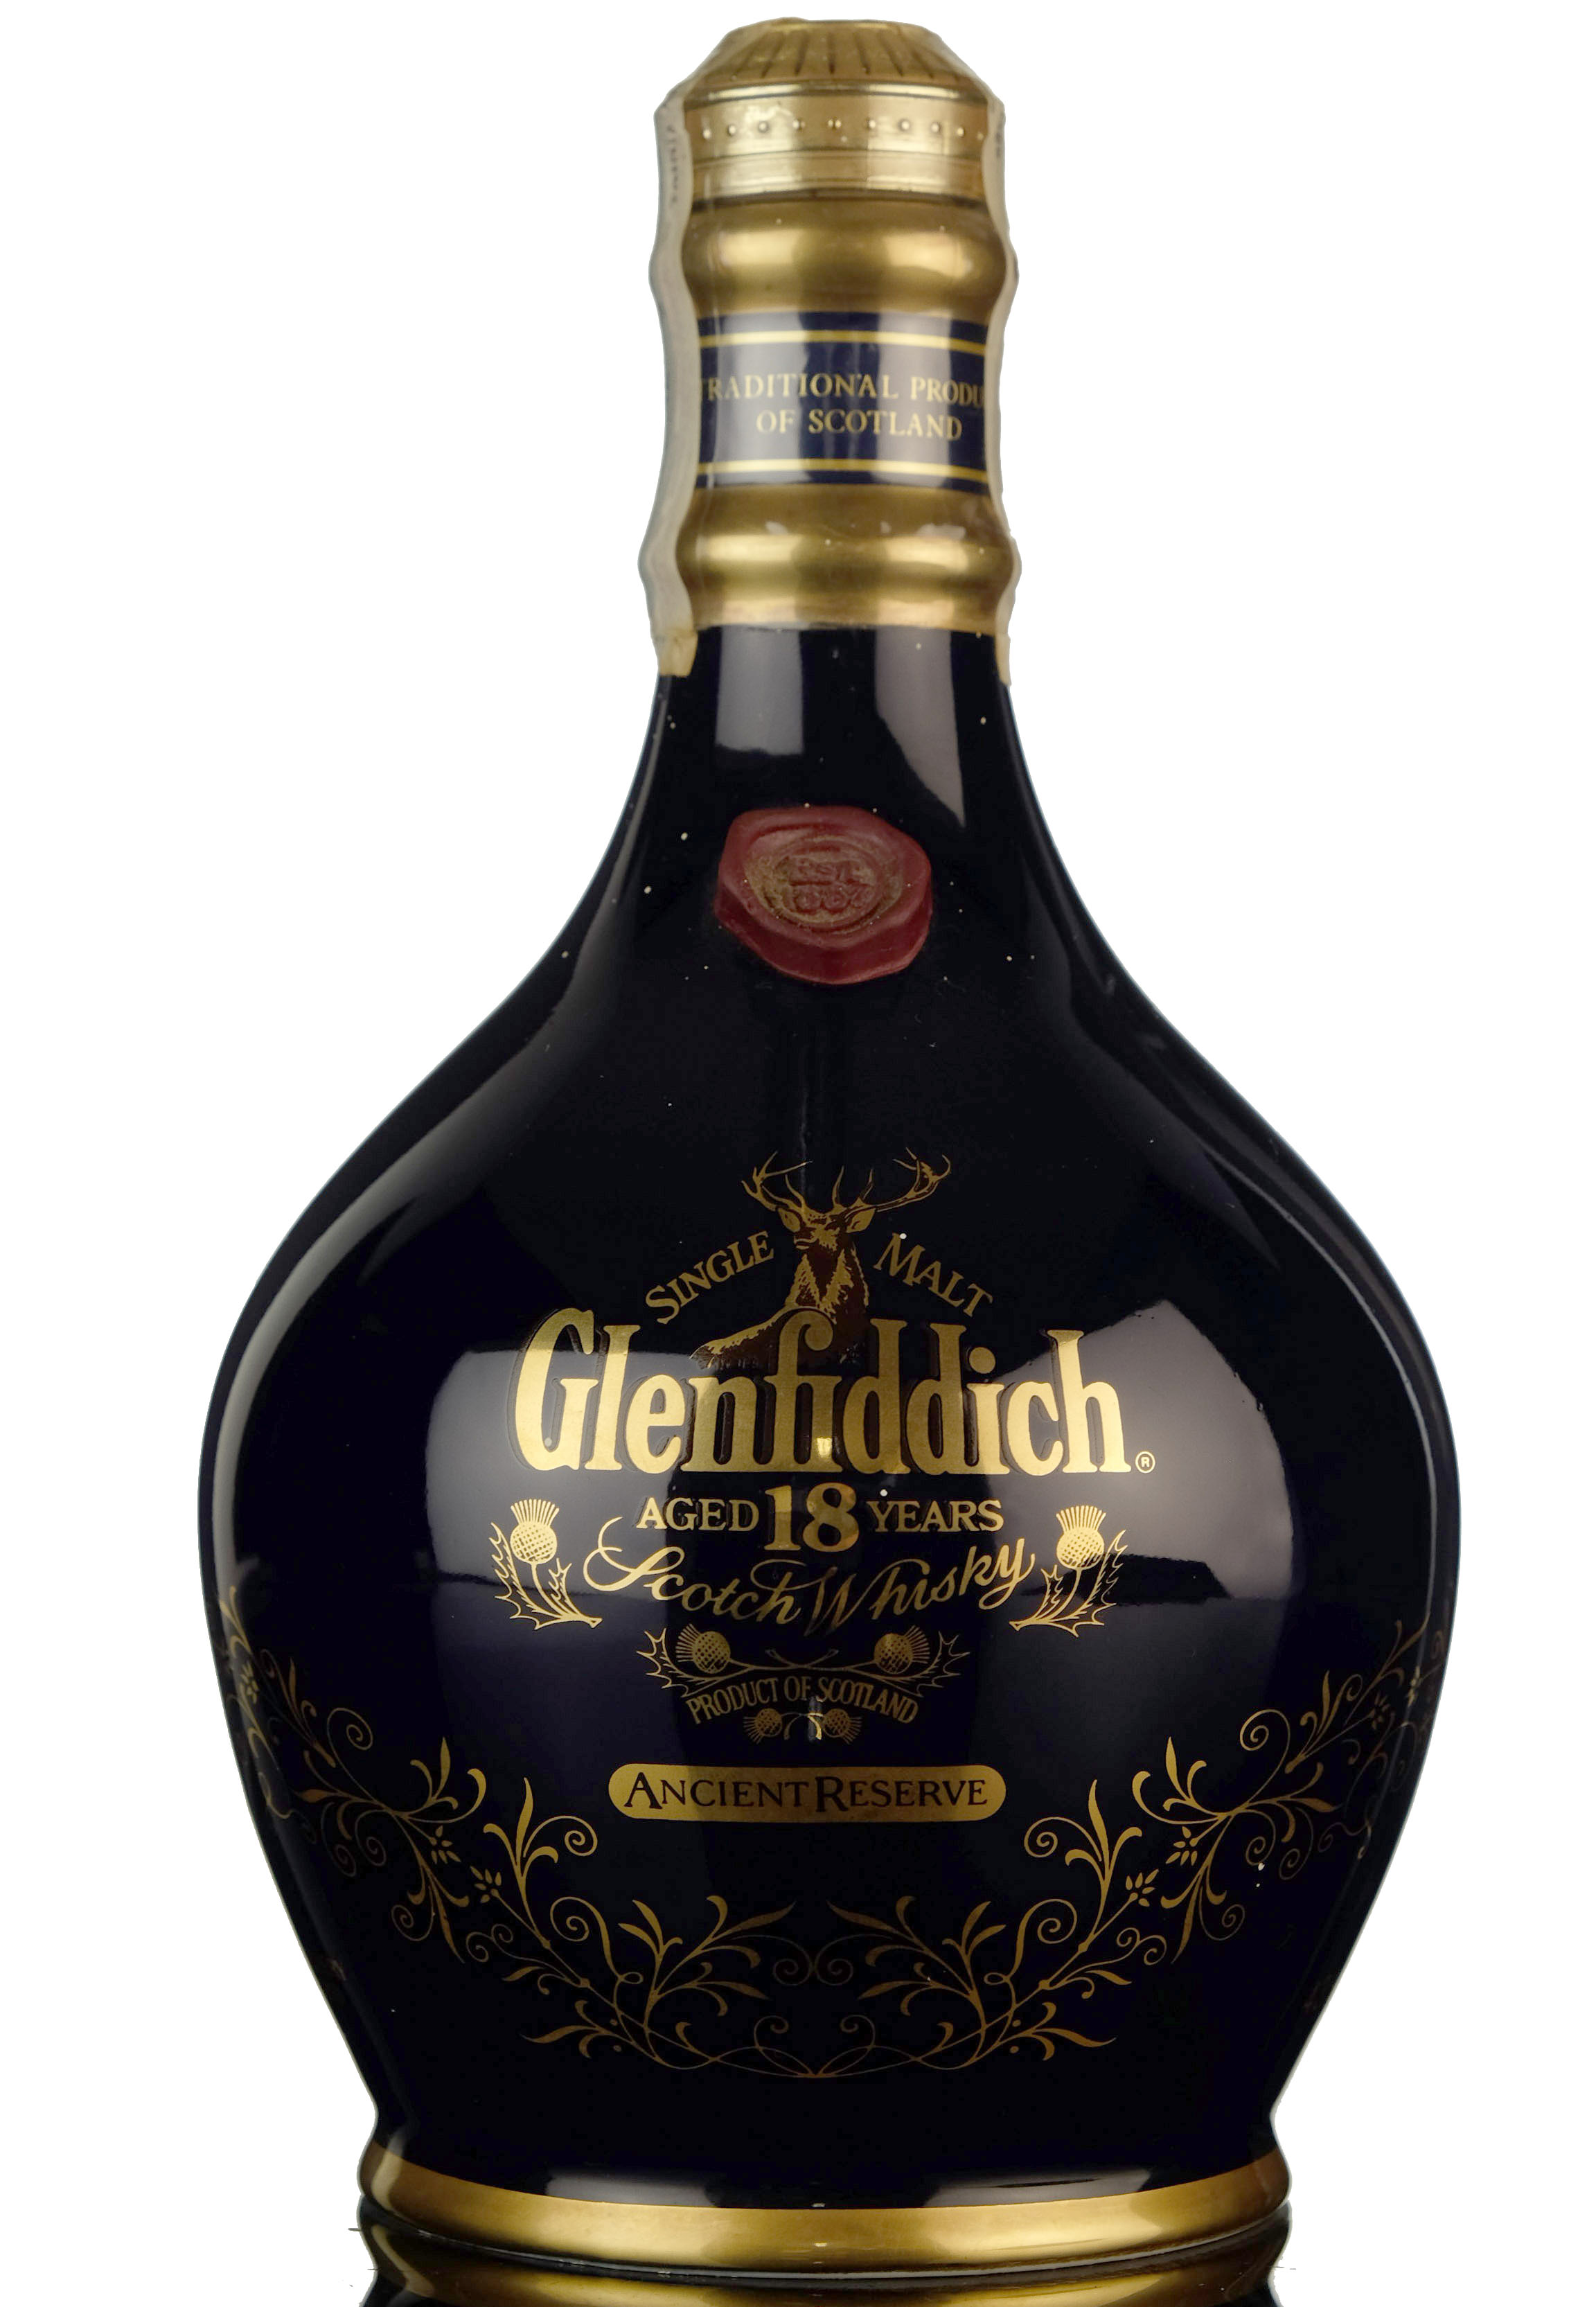 Glenfiddich 18 Year Old - Ancient Reserve Ceramic